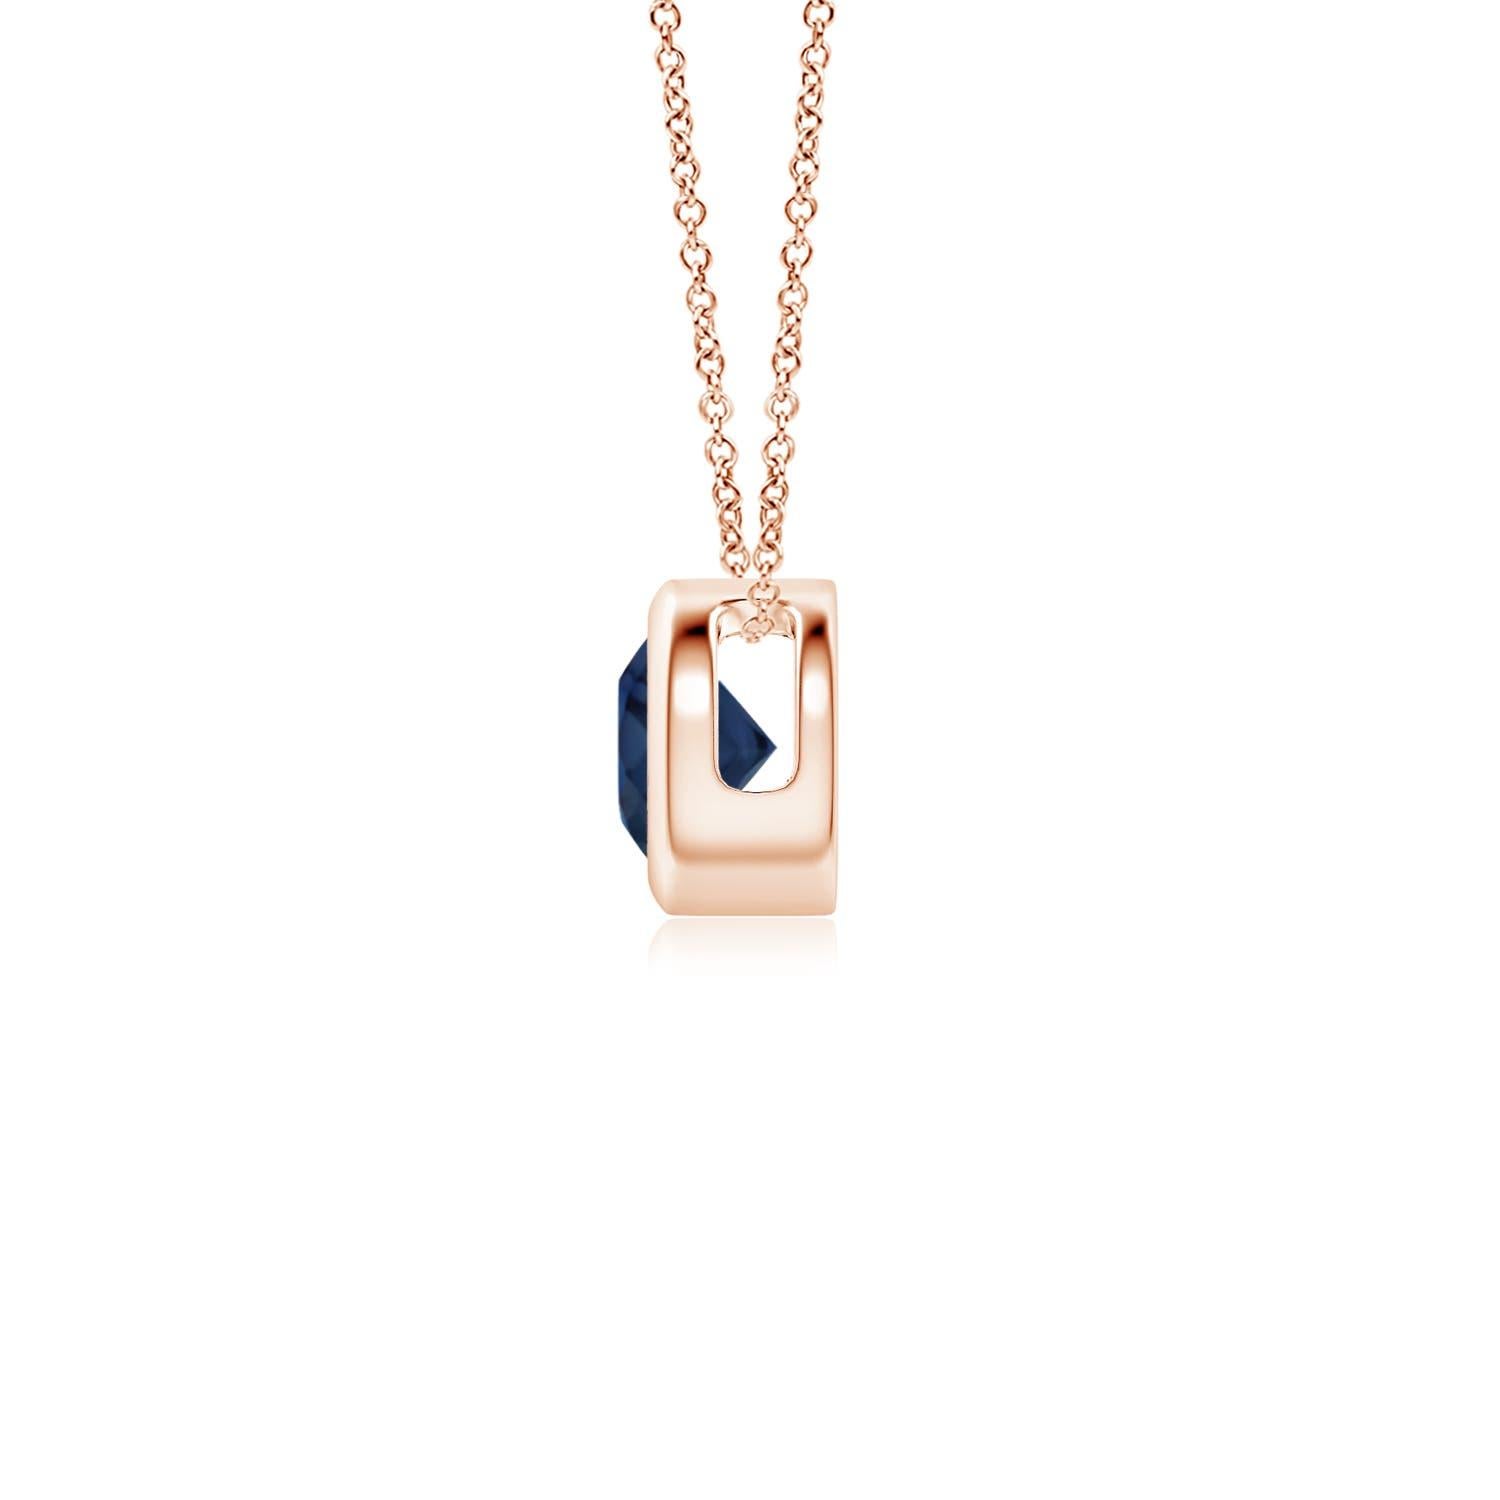 This classic solitaire sapphire pendant's beautiful design makes the center stone appear like it's floating on the chain. The radiant blue gem is secured in a bezel setting. Crafted in 14k rose gold, this round sapphire pendant is simple yet